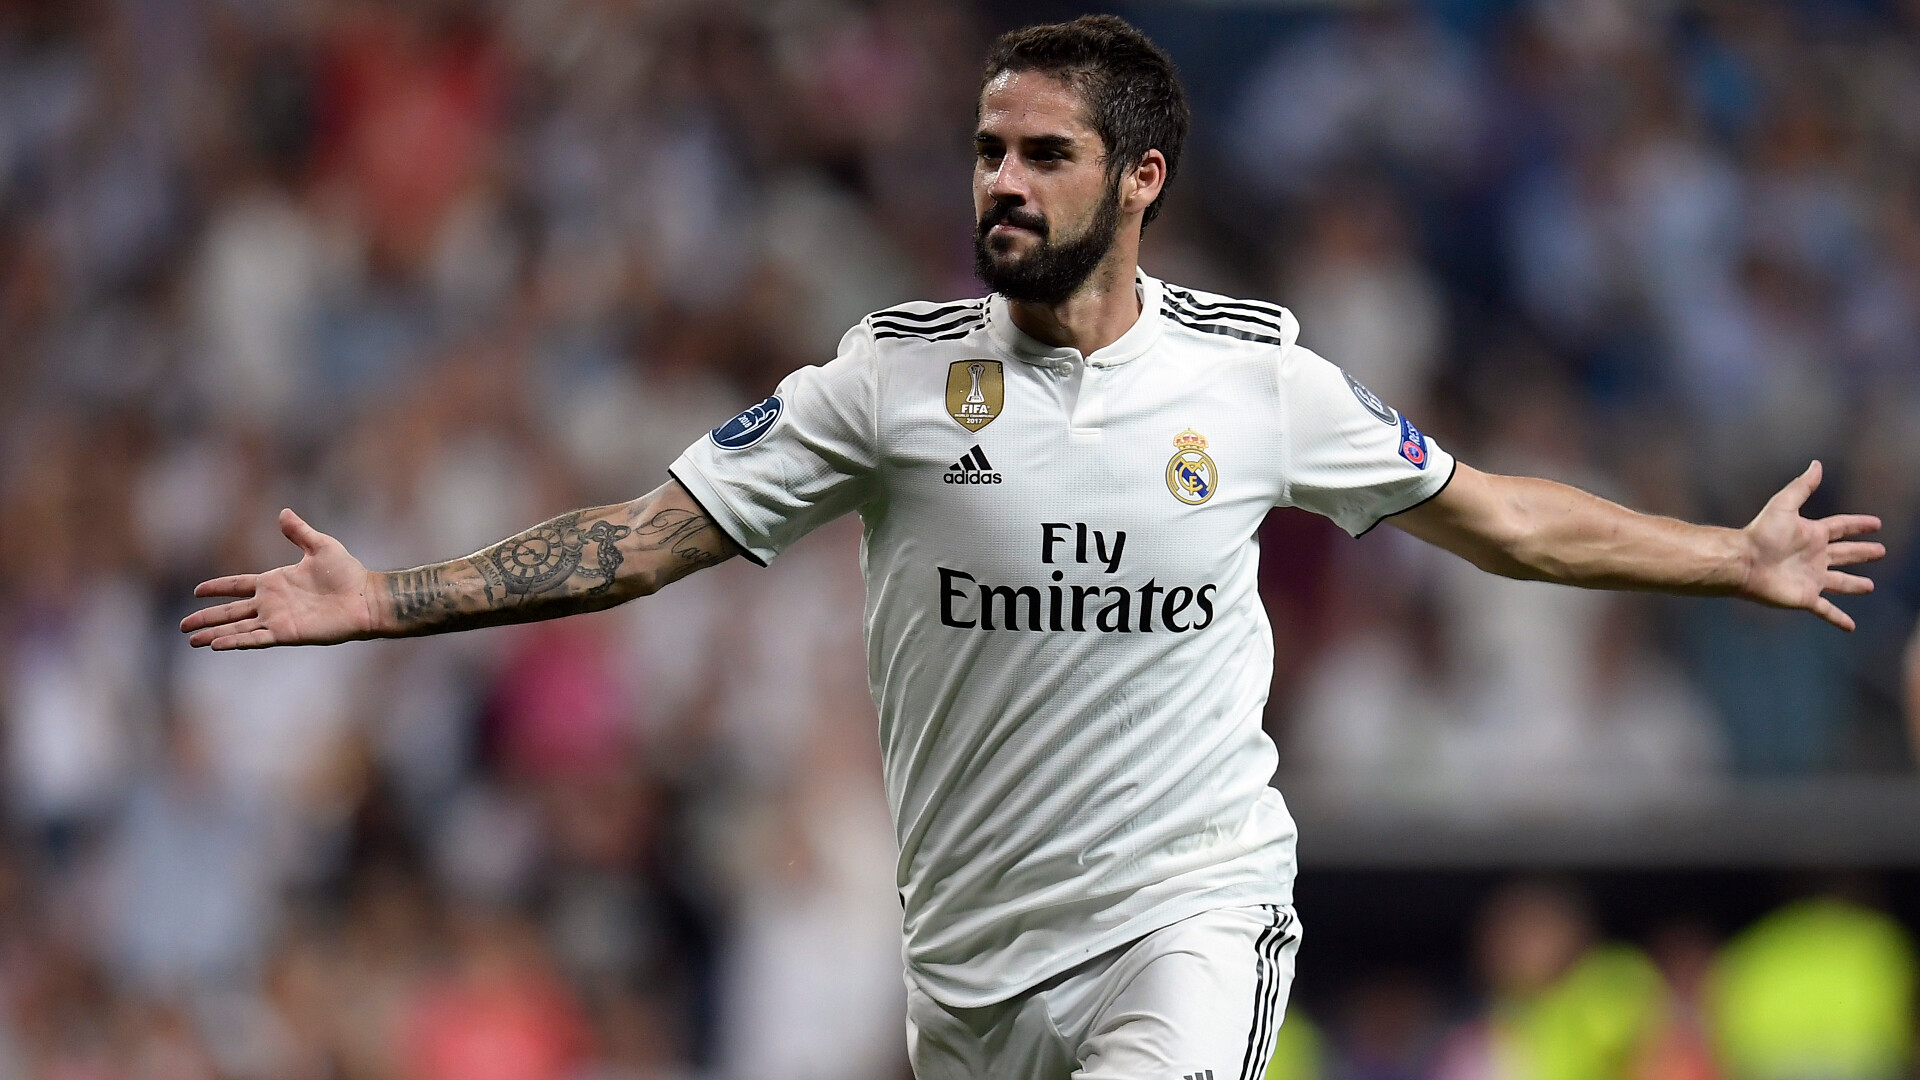 Real Madrid outcast, Juventus transfer rumours, Isco's future, Football speculation, 1920x1080 Full HD Desktop